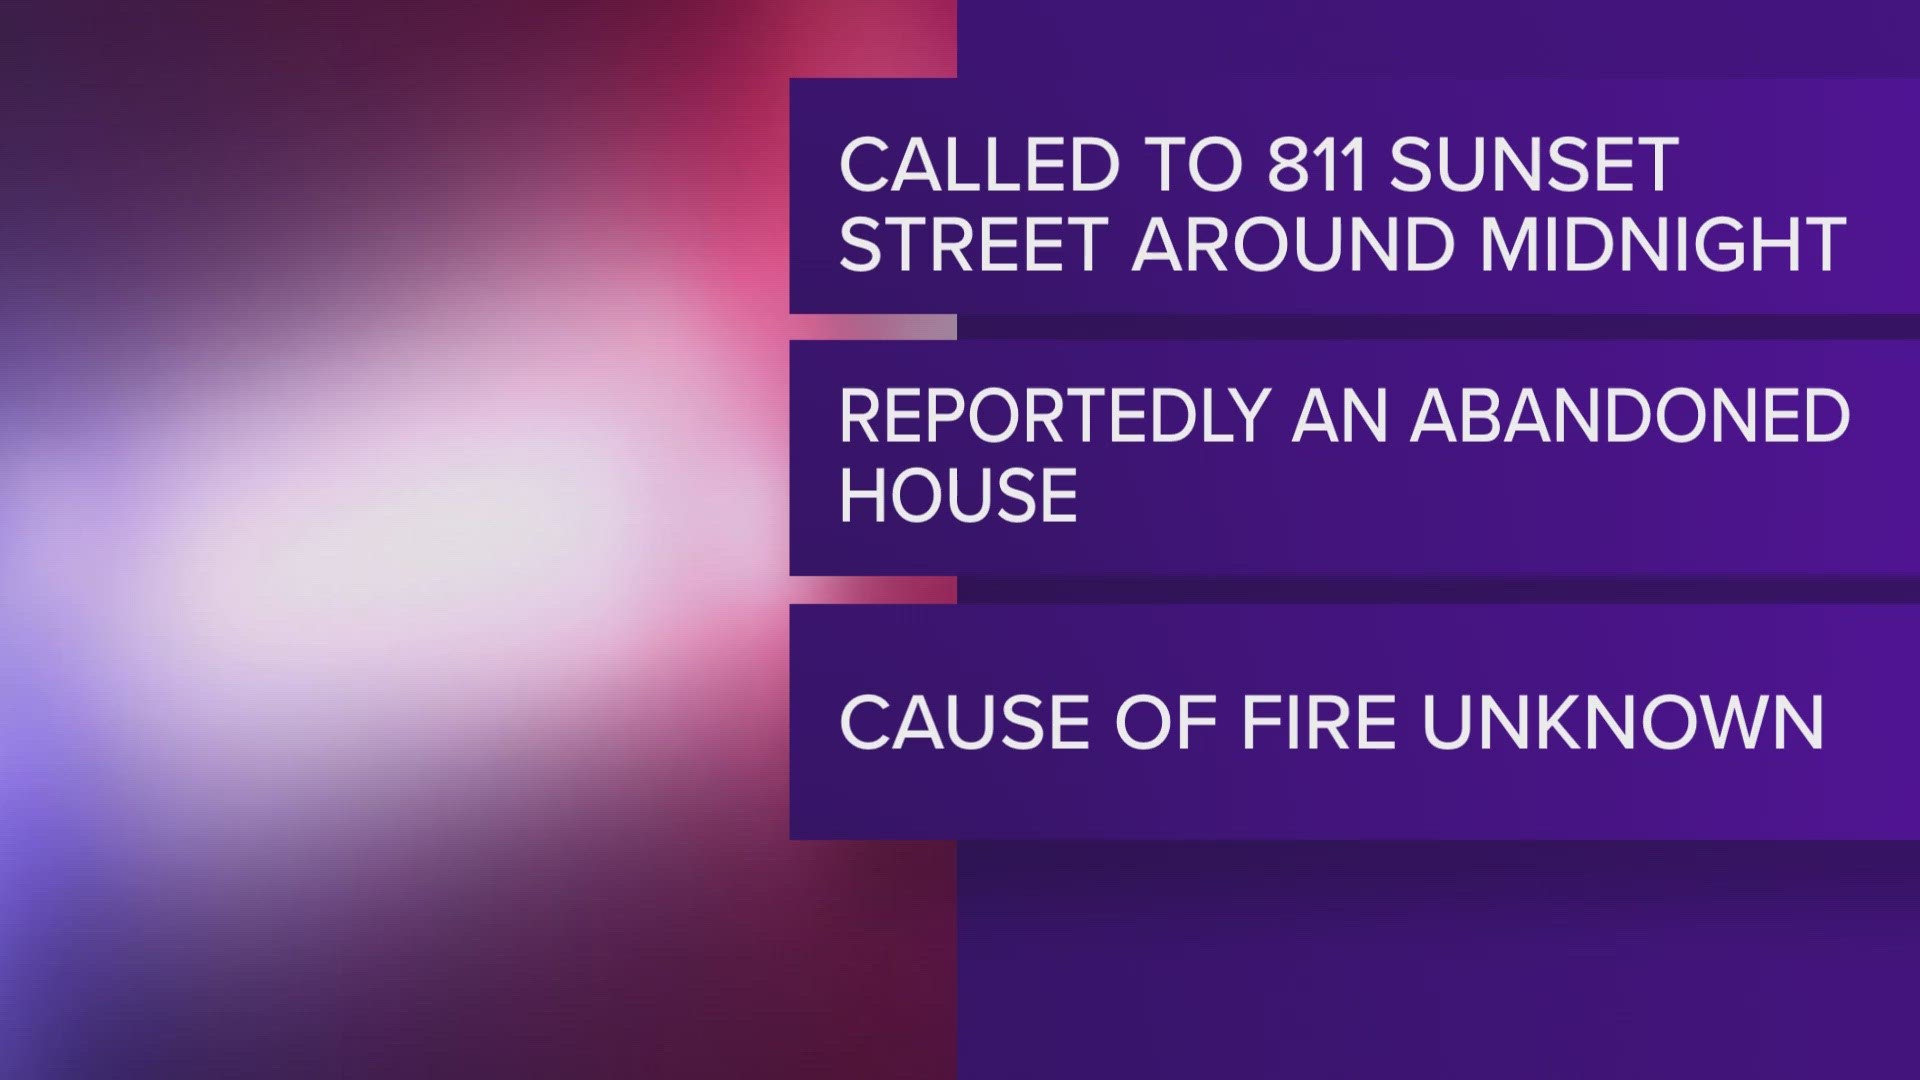 A neighbor told fire crews that the house was abandoned but noticed a squatter living in it.